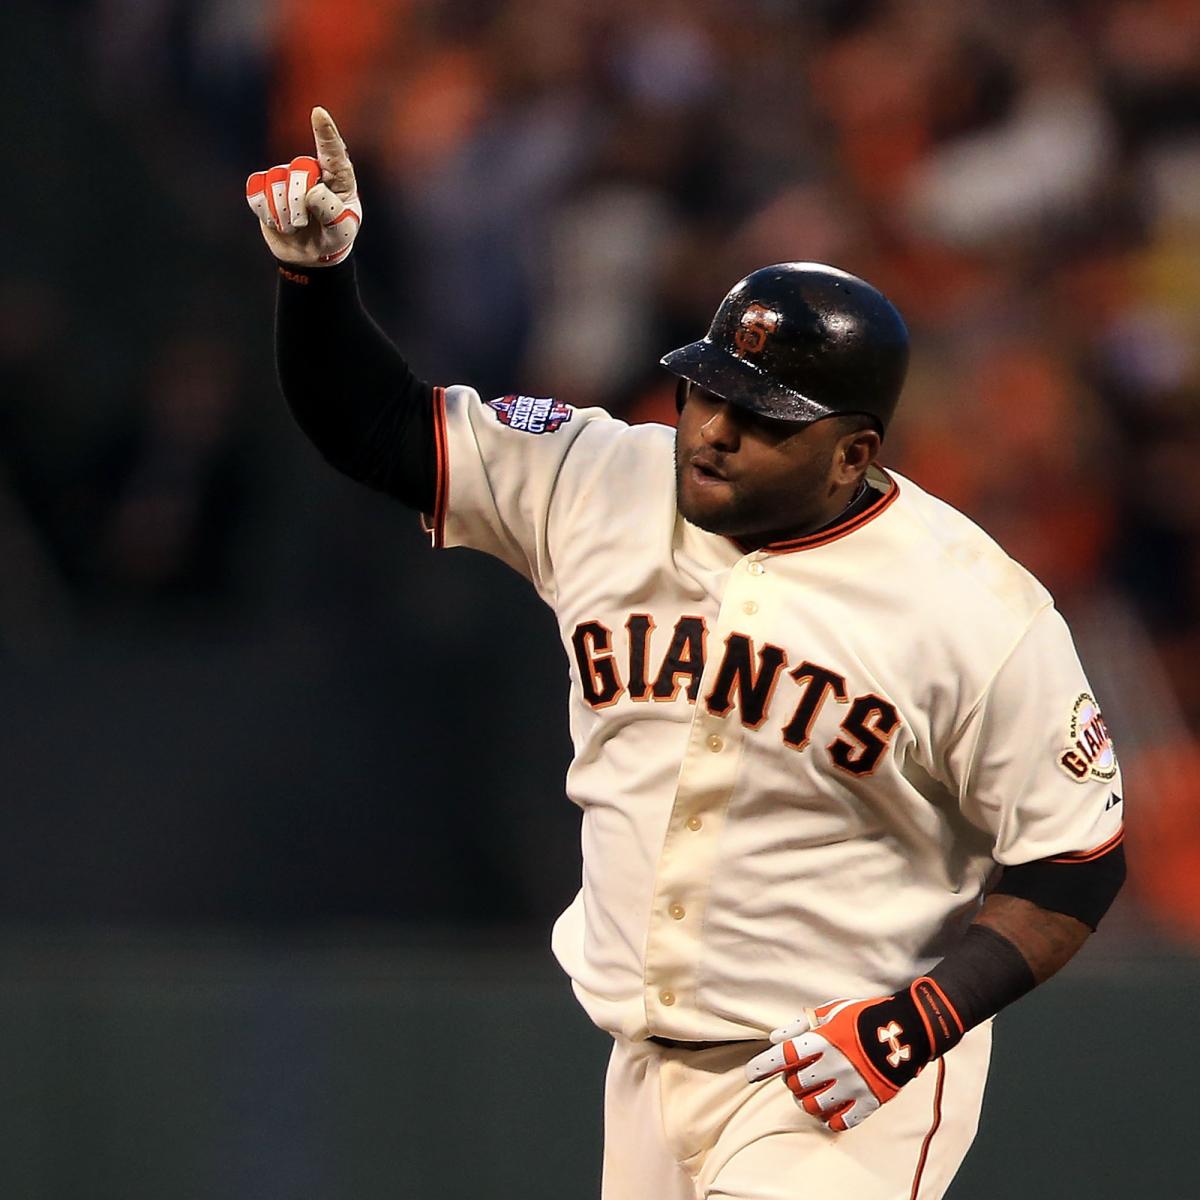 FOX Sports: MLB on X: Pablo Sandoval now has the most World Series rings  (4) among active players 🐼  / X